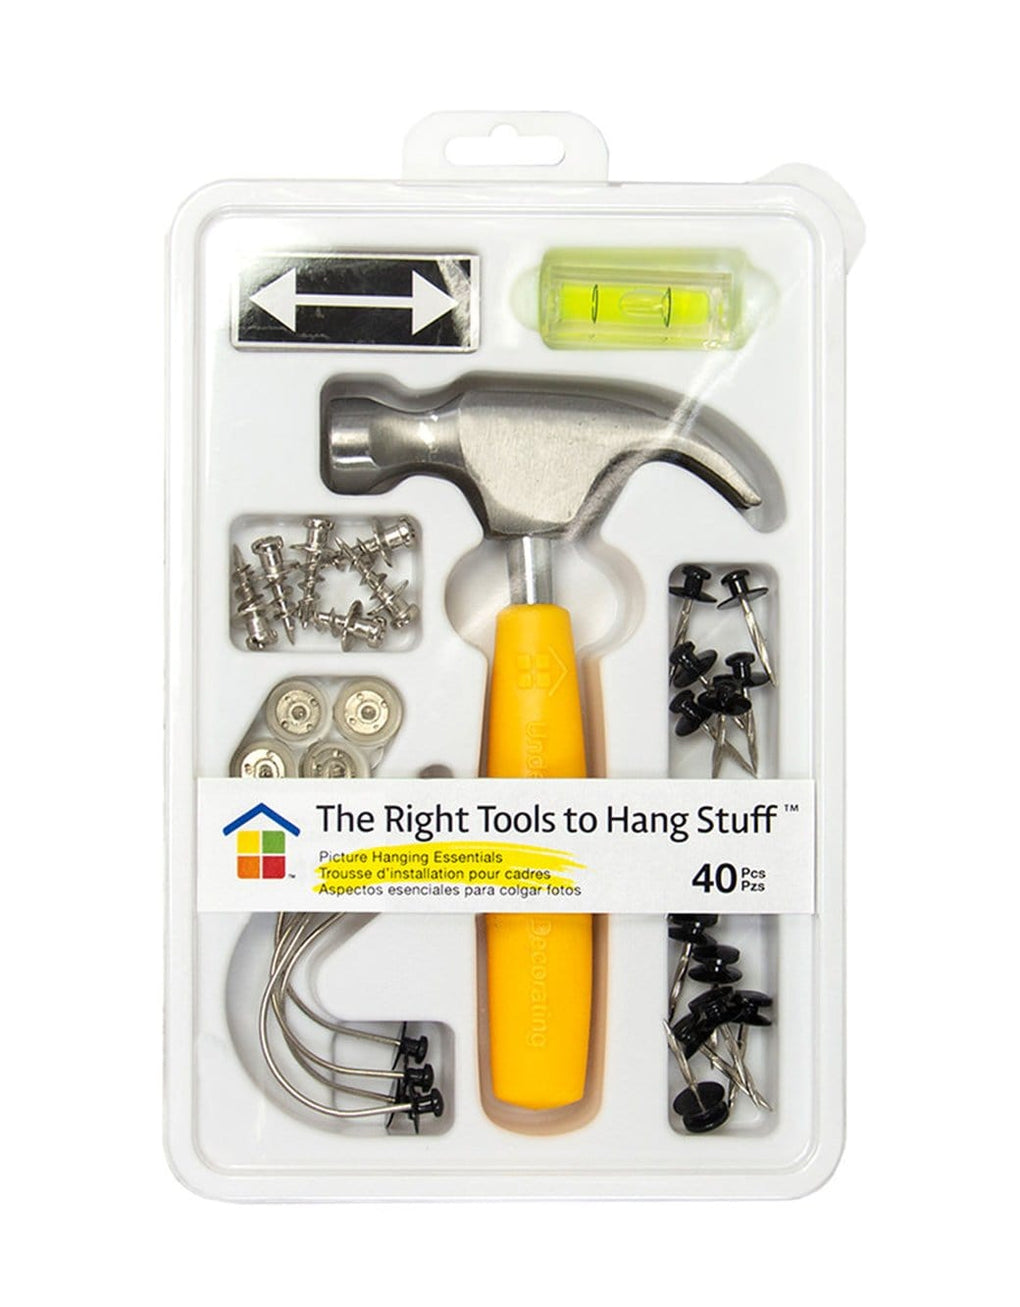 Picture Hanging Tool Kit For Home Design Exclusive Hanging